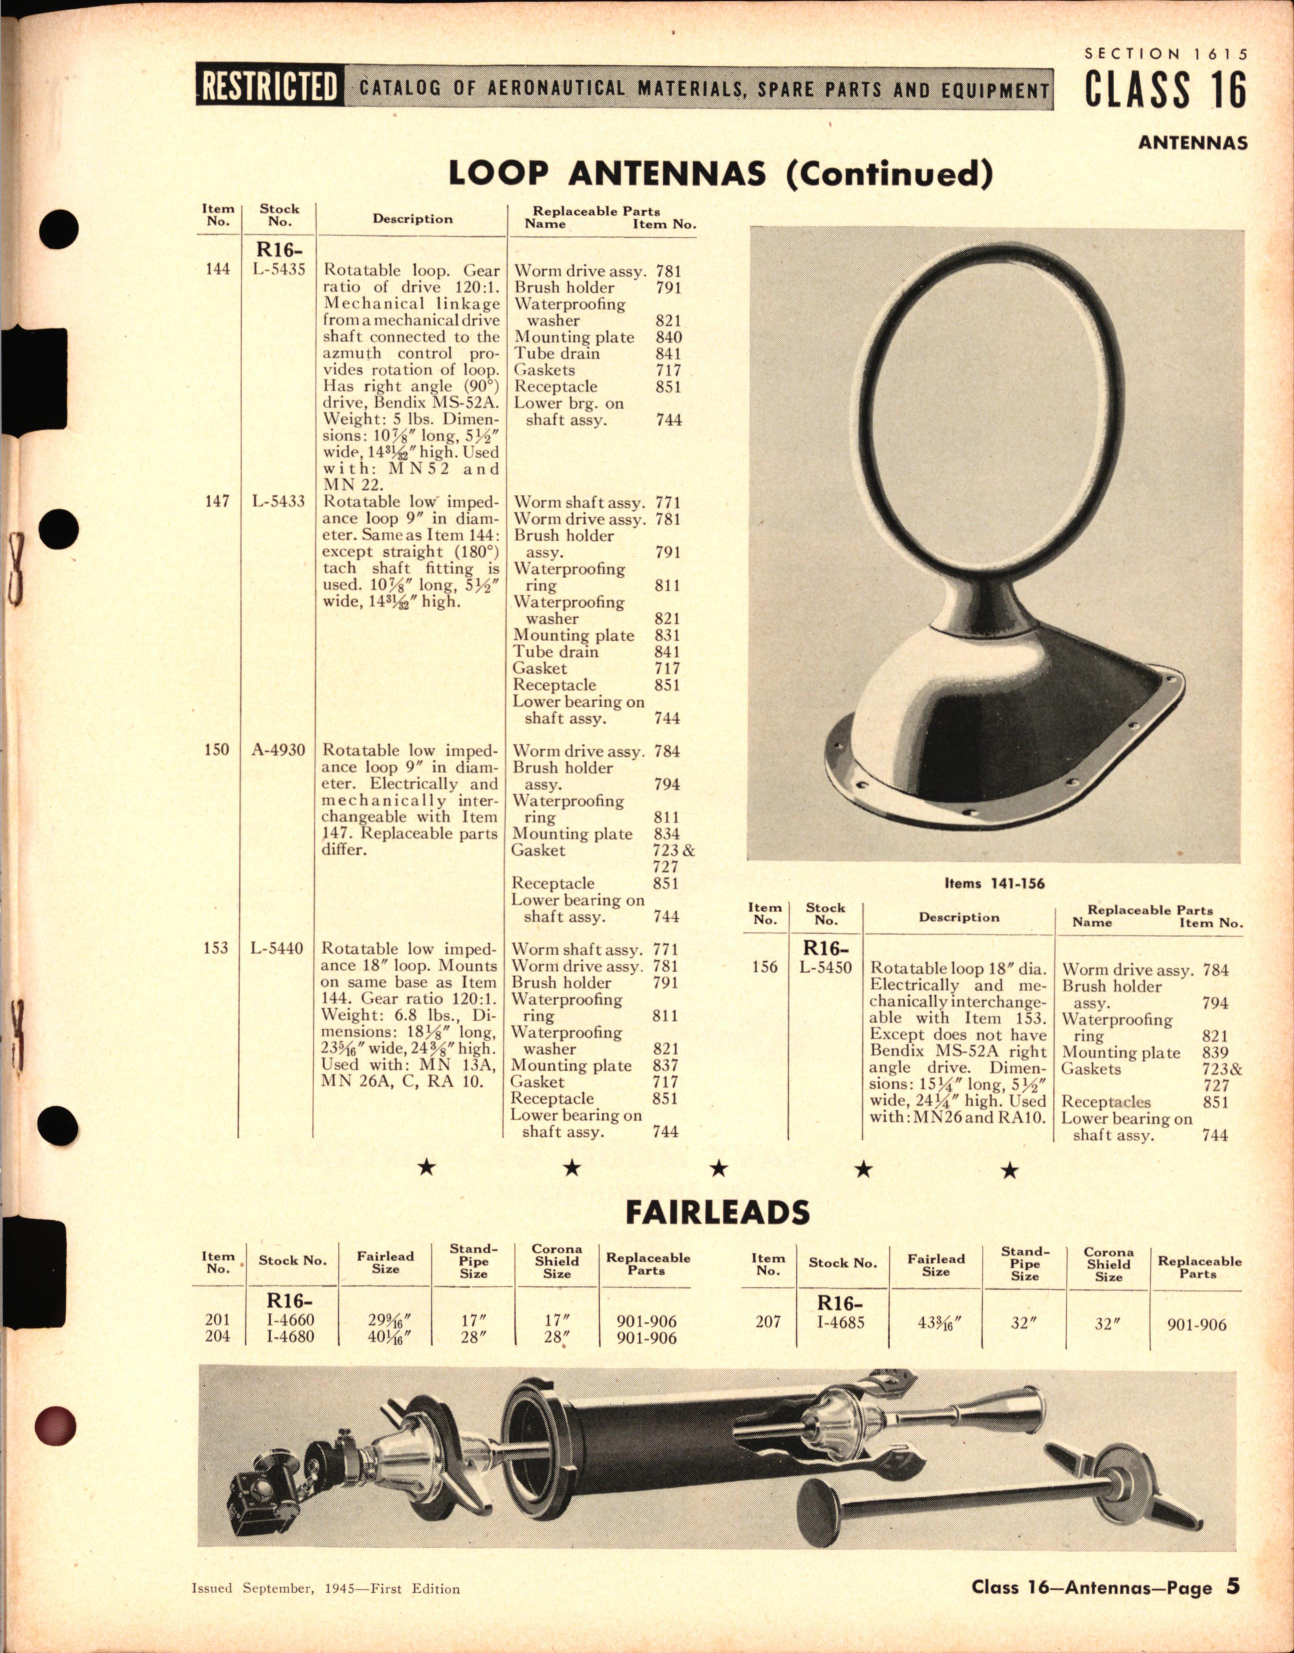 Sample page 5 from AirCorps Library document: Antennas, Fairleads and Accessories